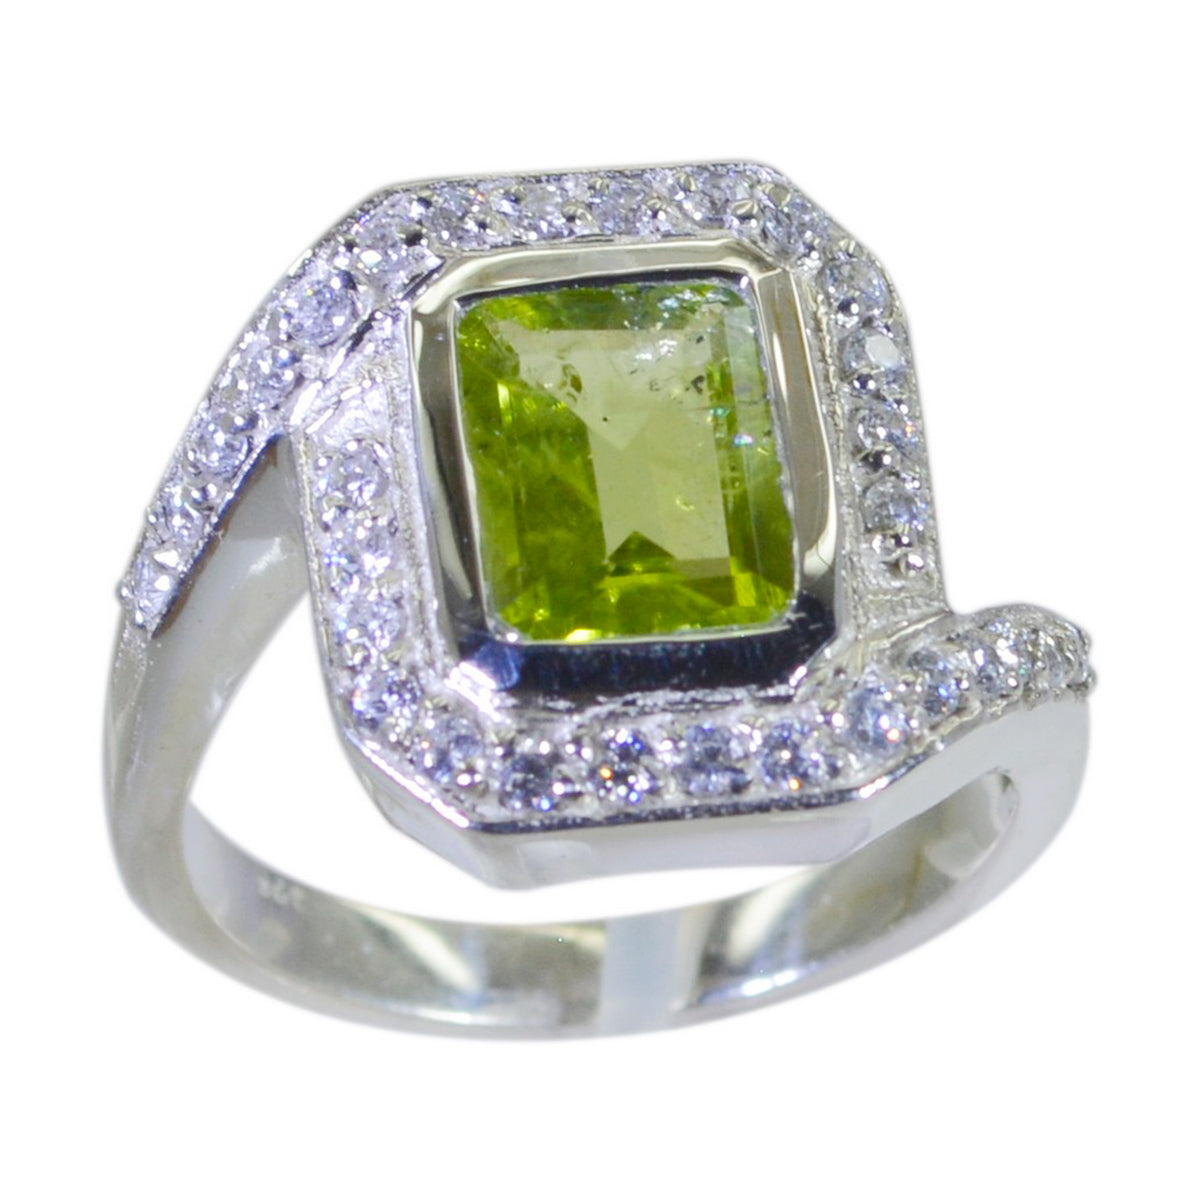 Handsome Gem Peridot 925 Sterling Silver Rings Fred Meyers Jewelry